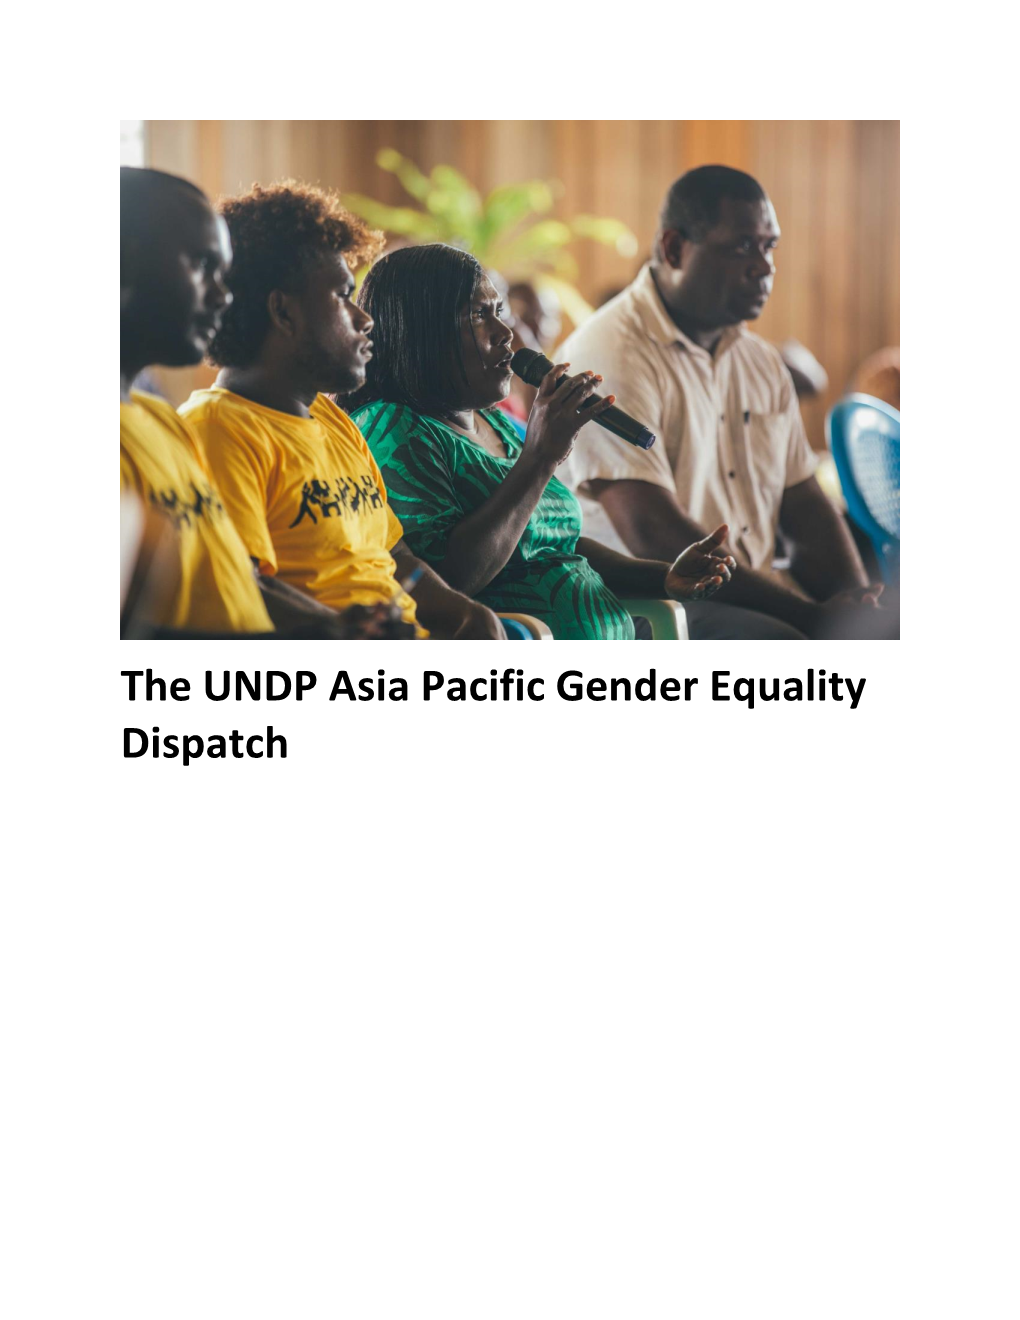 The UNDP Asia Pacific Gender Equality Dispatch Welcome to the Bi-Annual UNDP Gender Equality Newsletter from the Bangkok Regional Hub